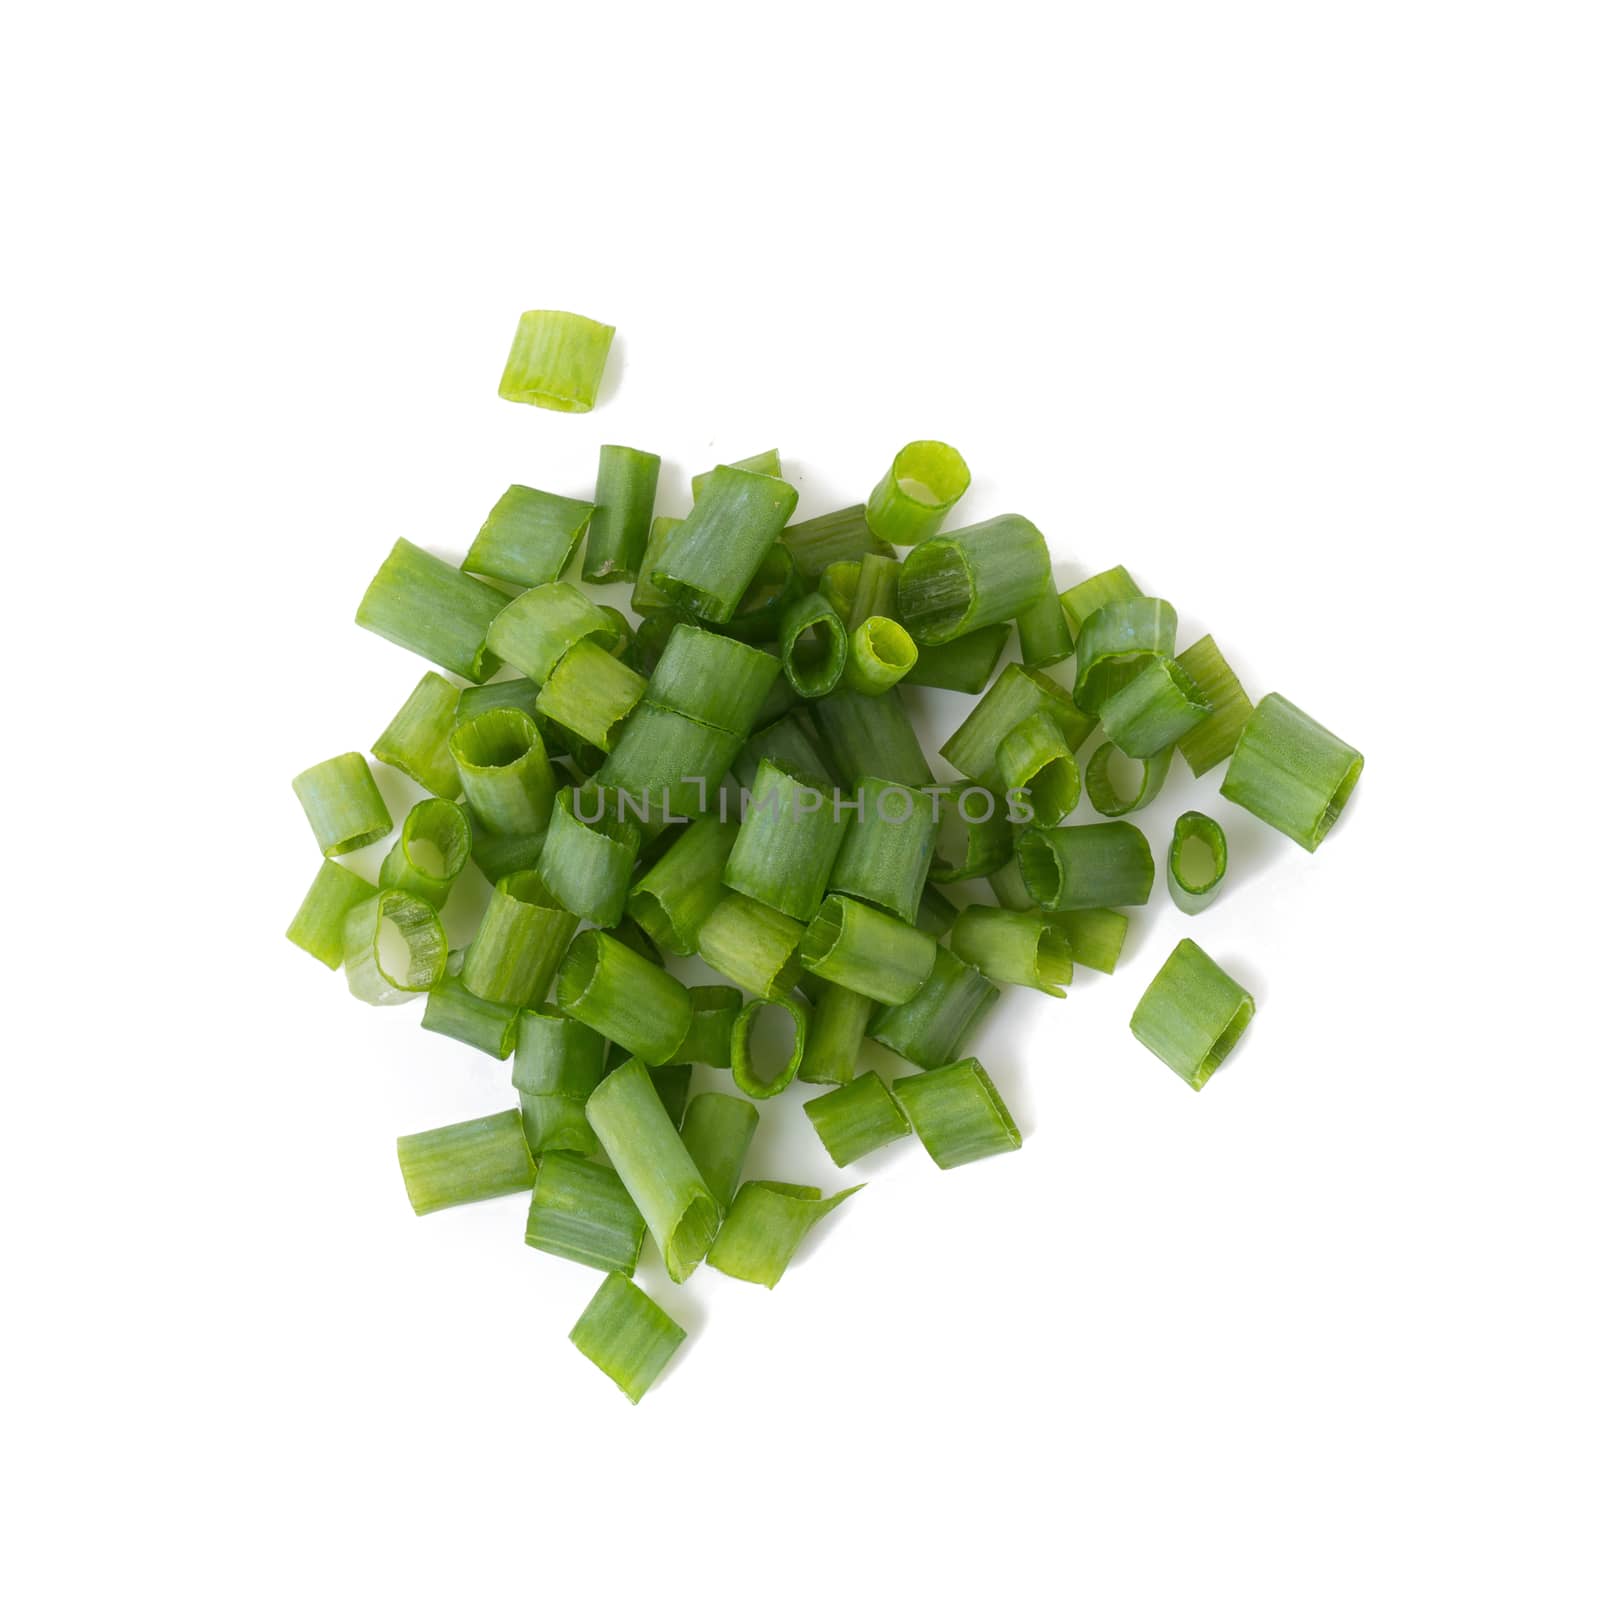 Chopped fresh green onions isolated on white background by kaiskynet